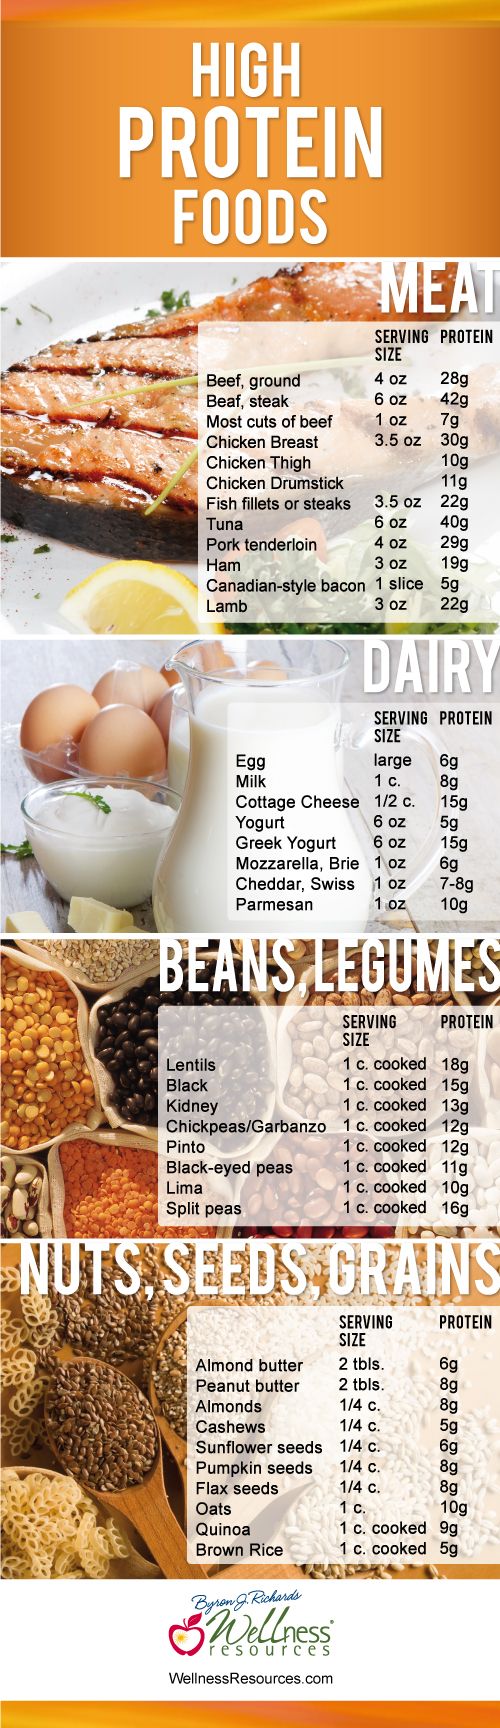 Best High Protein Foods - meats, dairy, beans, legumes, nuts, seeds, grains